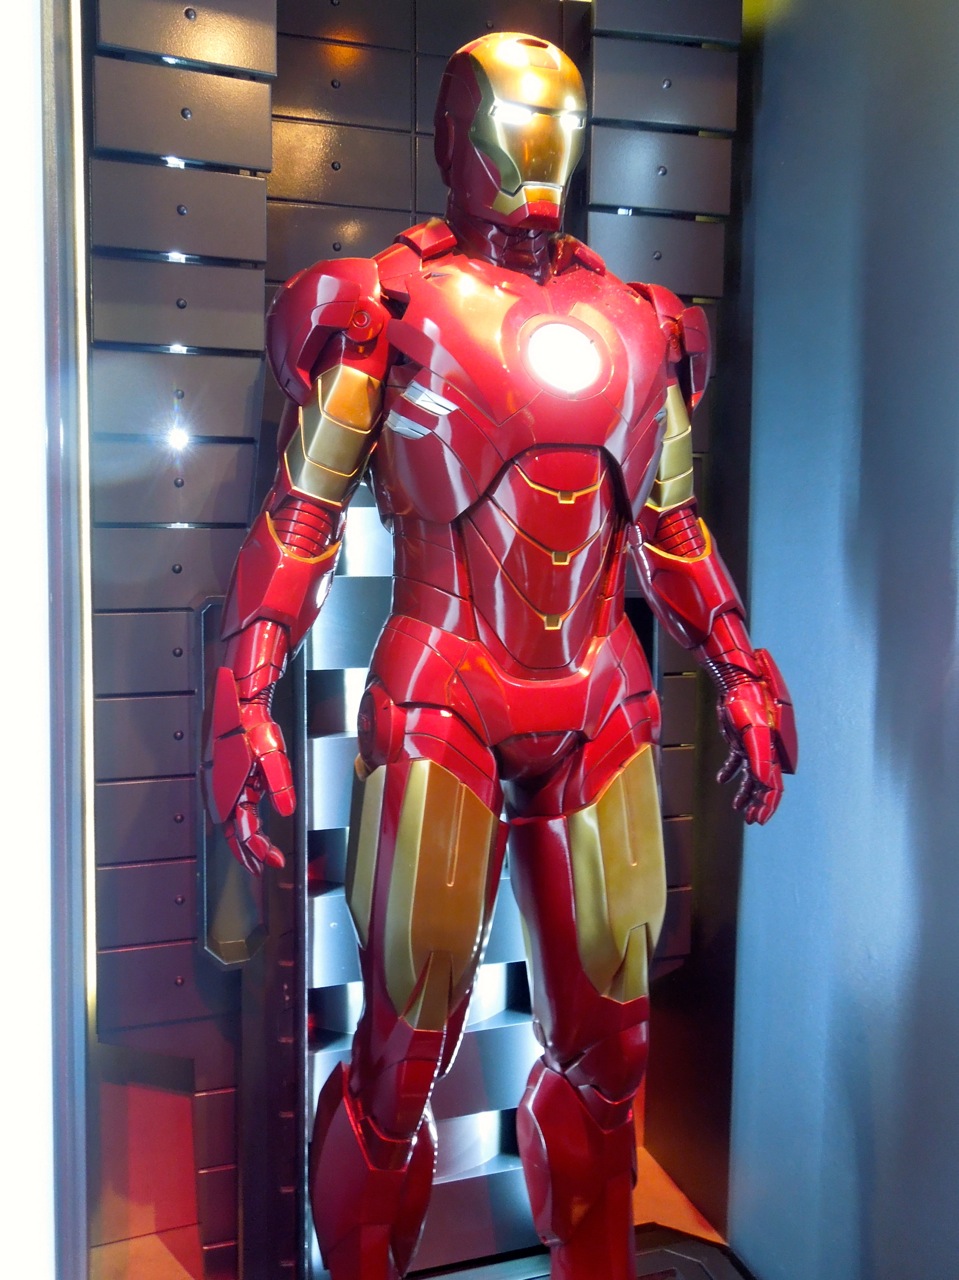 Hollywood Movie Costumes and Props: Iron Man Mark IV suit on display ...